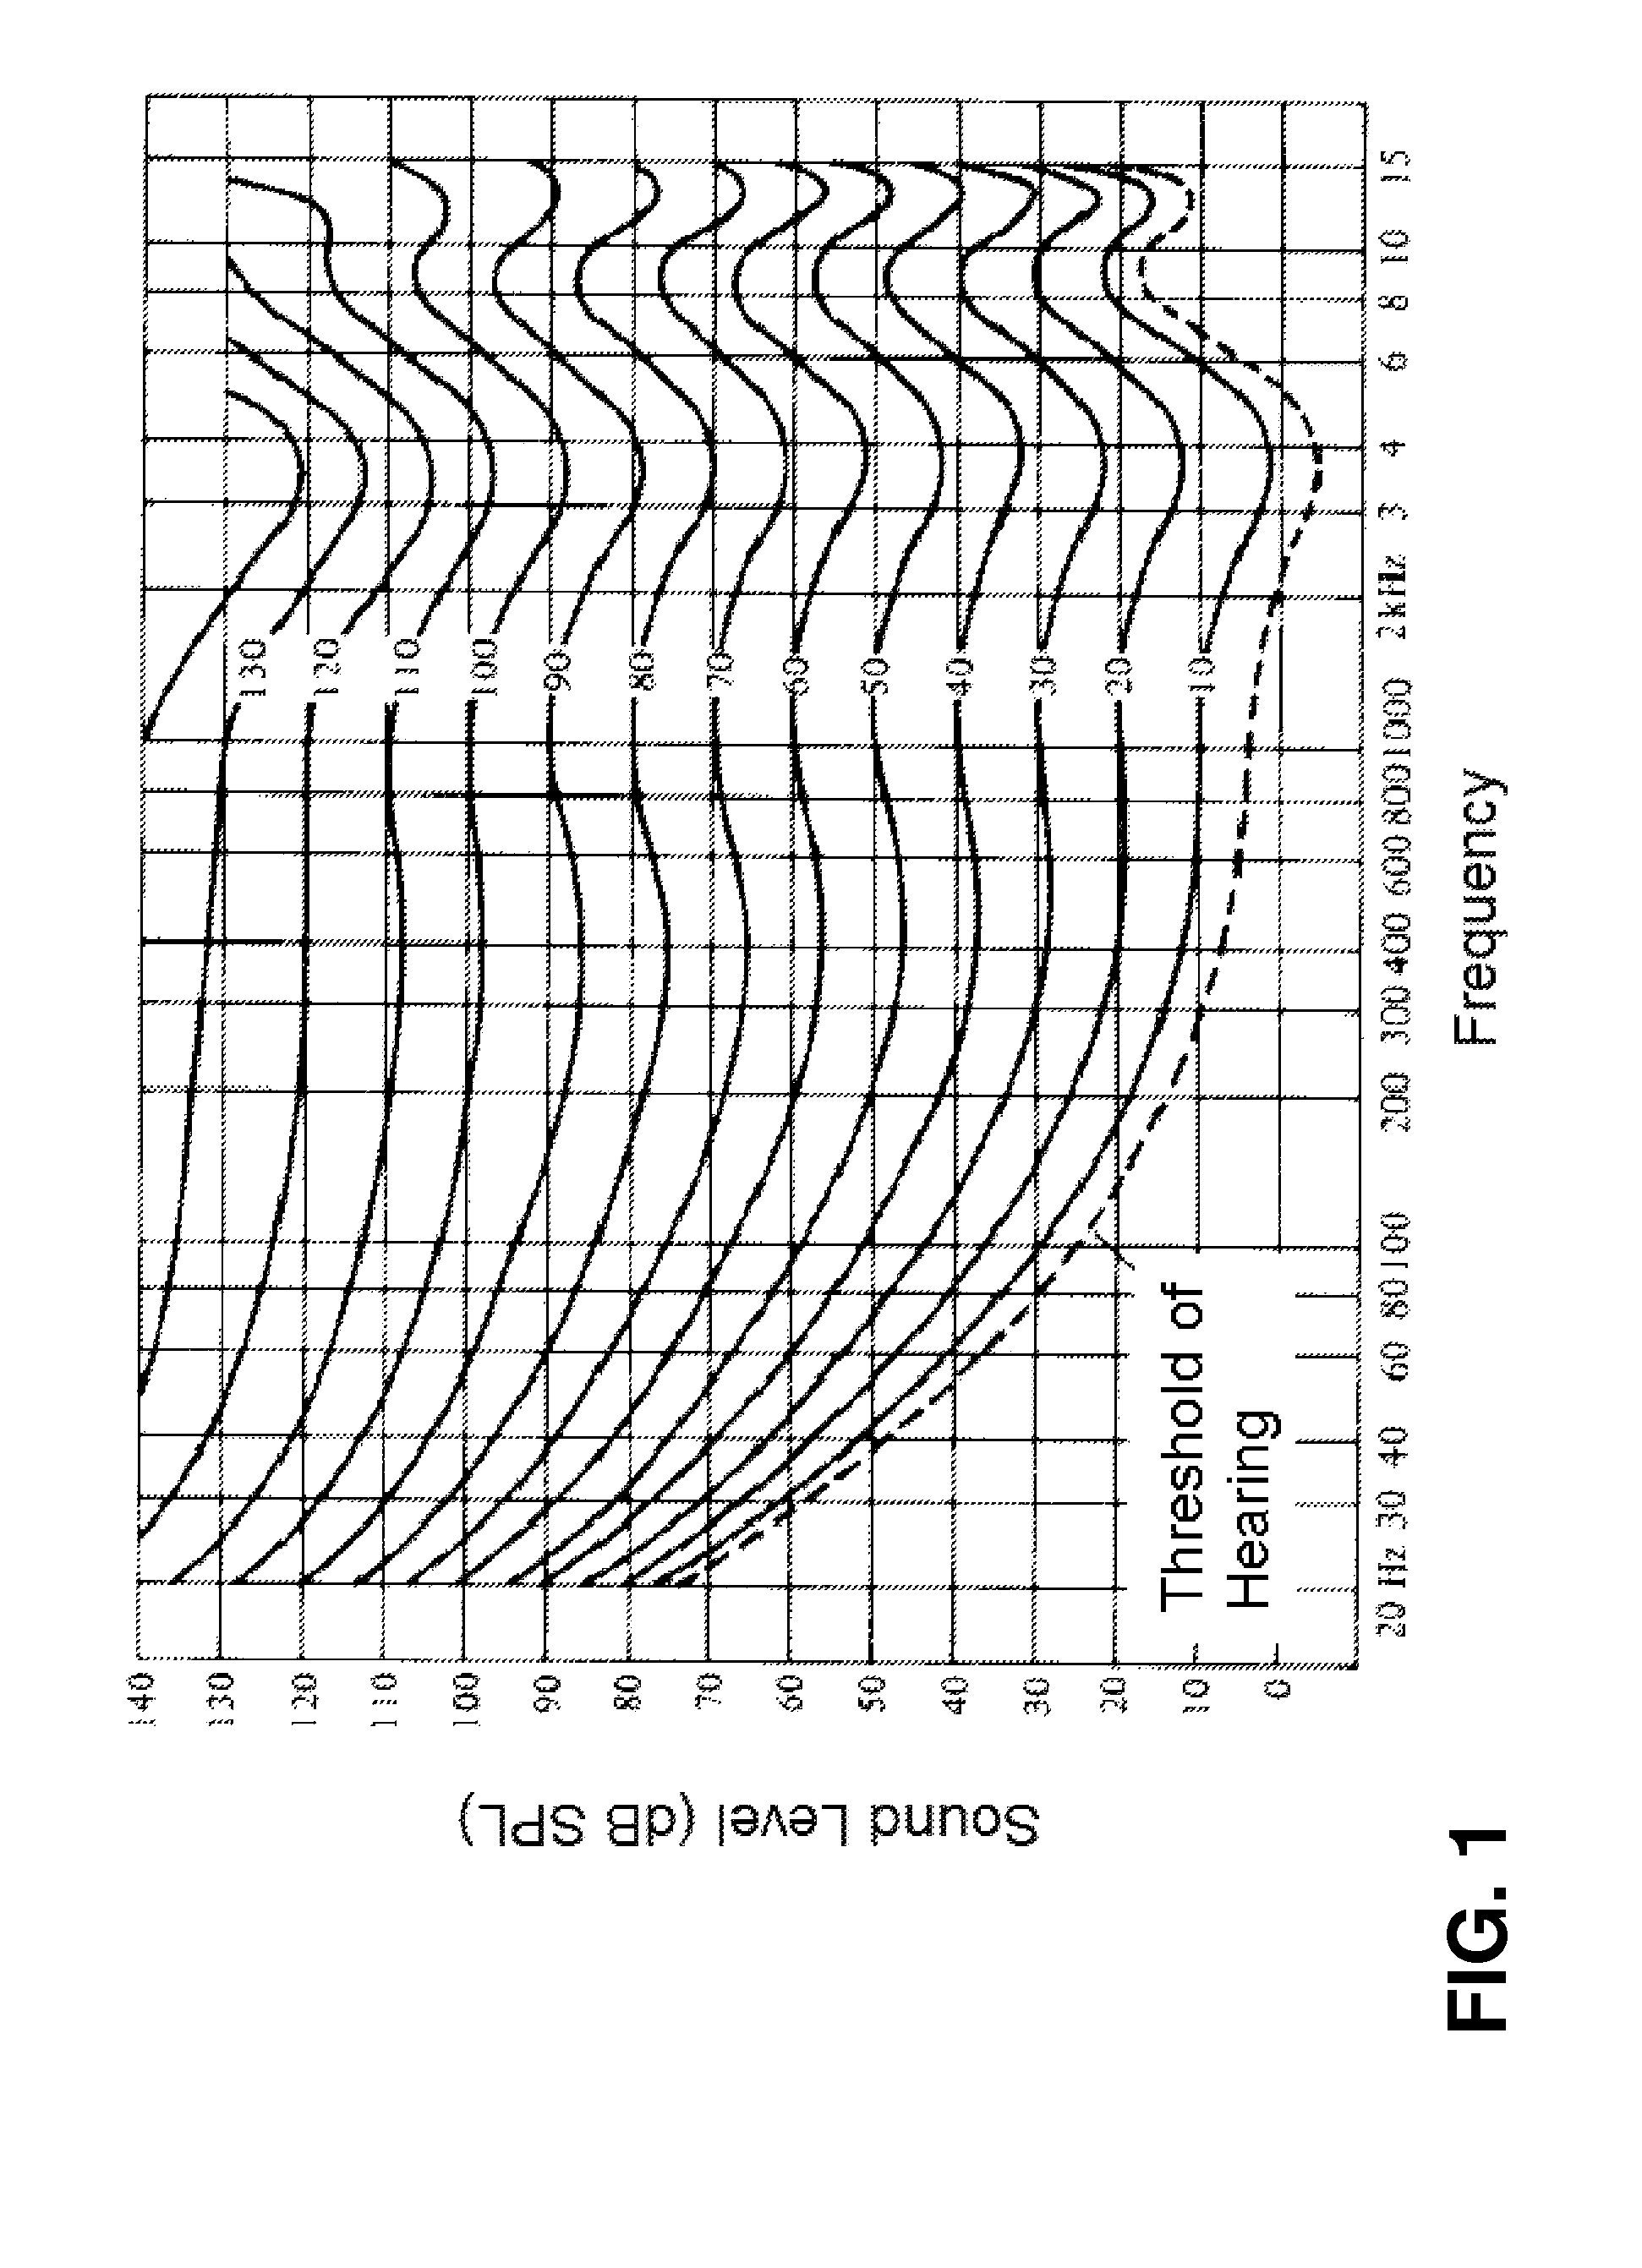 Perception enhancement for low-frequency sound components